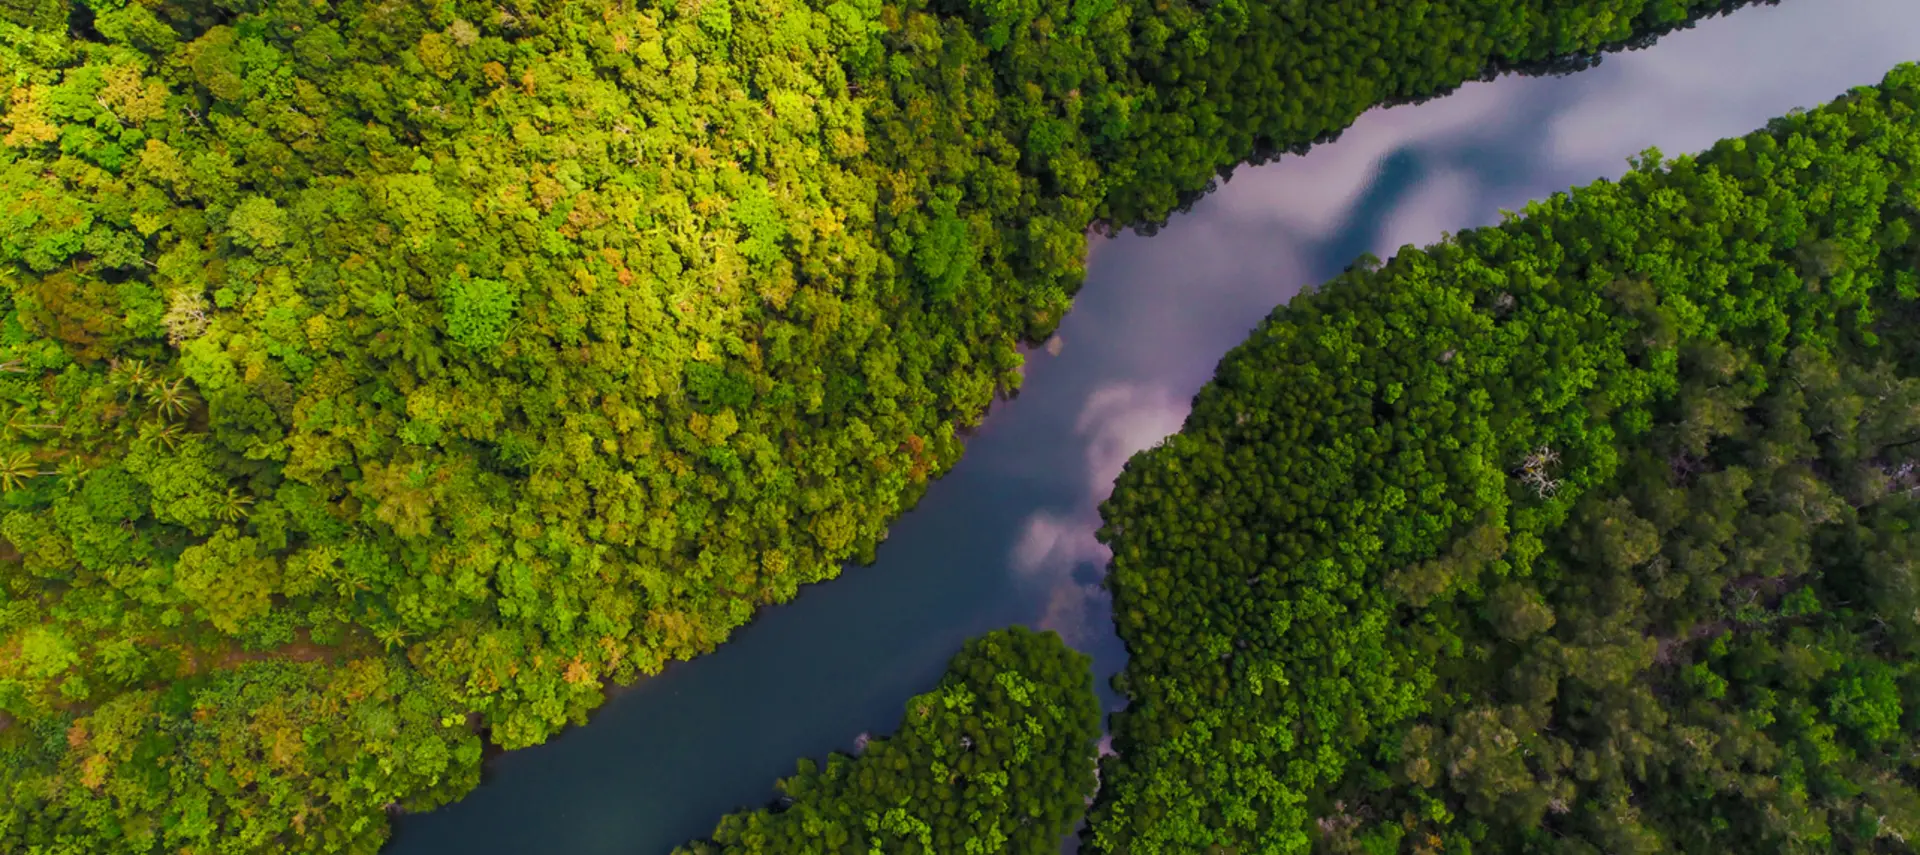 Above image of a river in the Amazon region